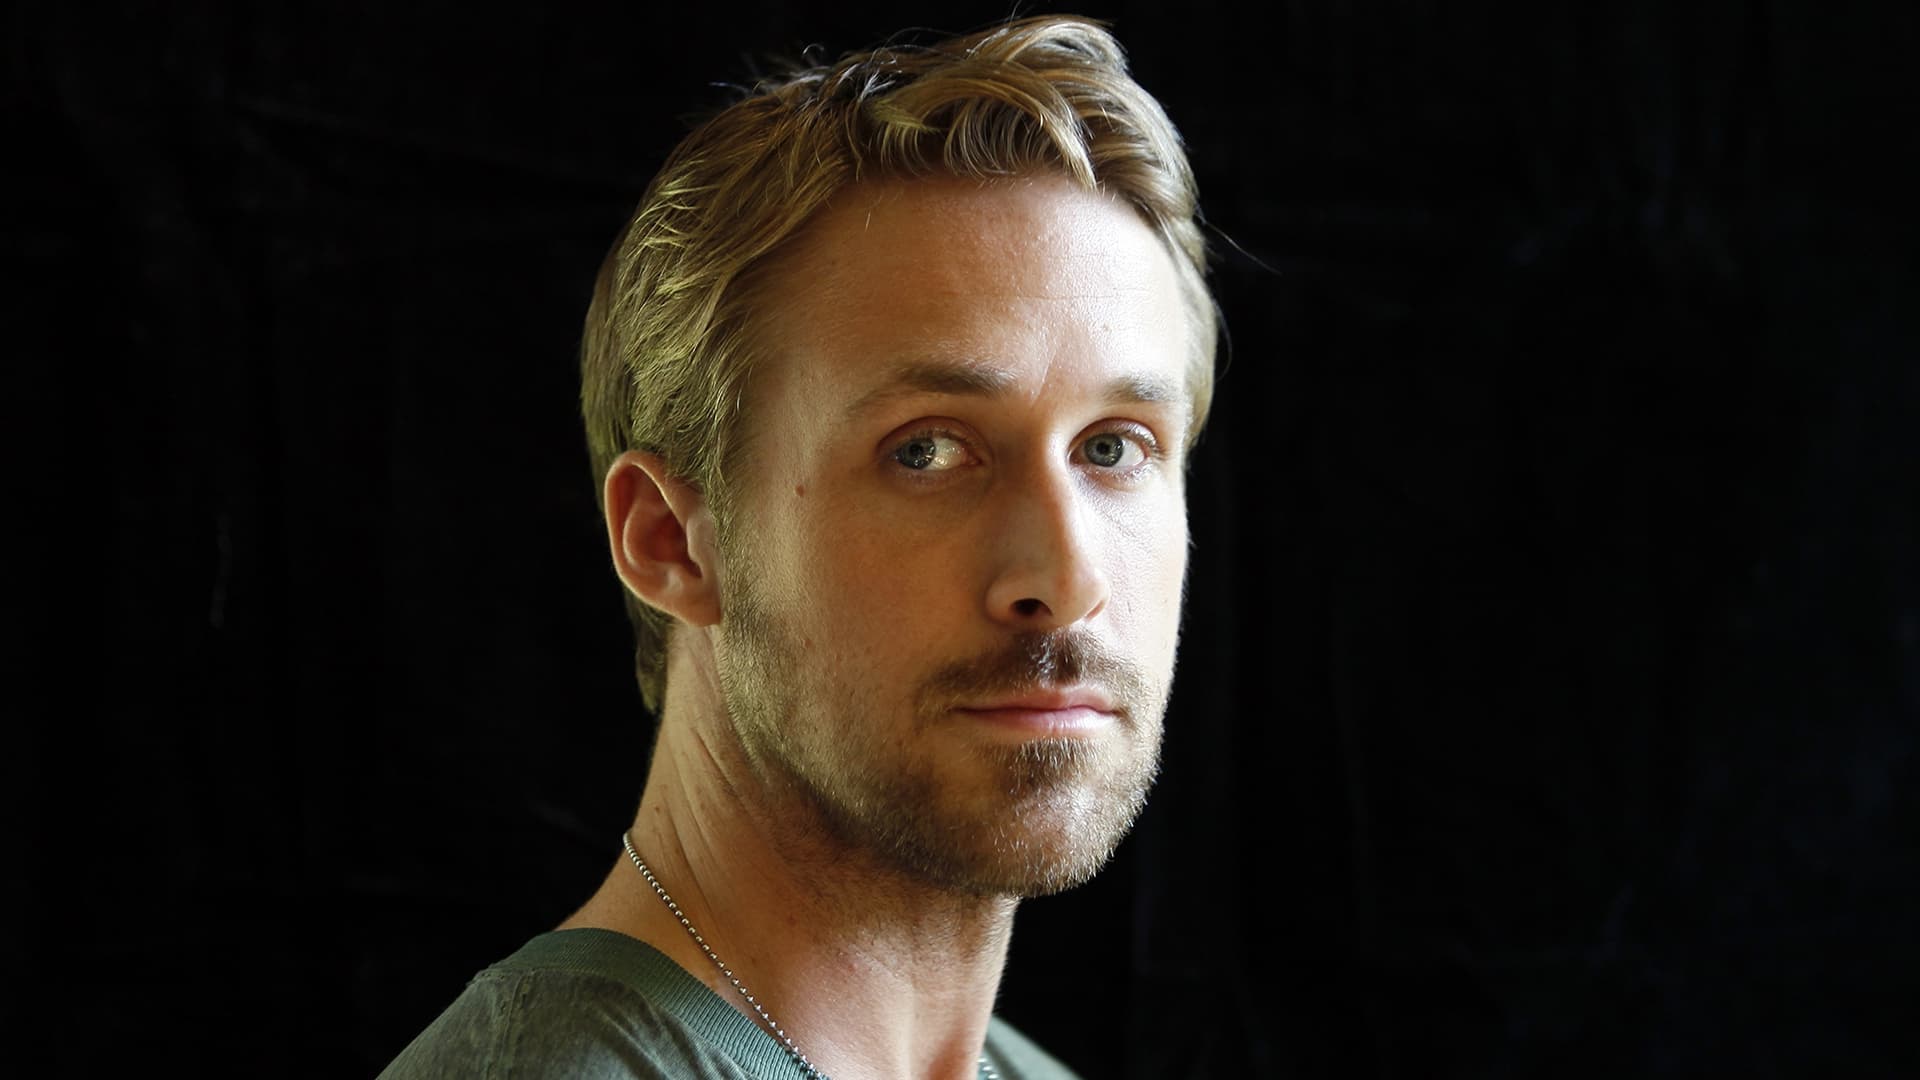 14 Ryan Gosling wallpapers HD HIgh Quality Download